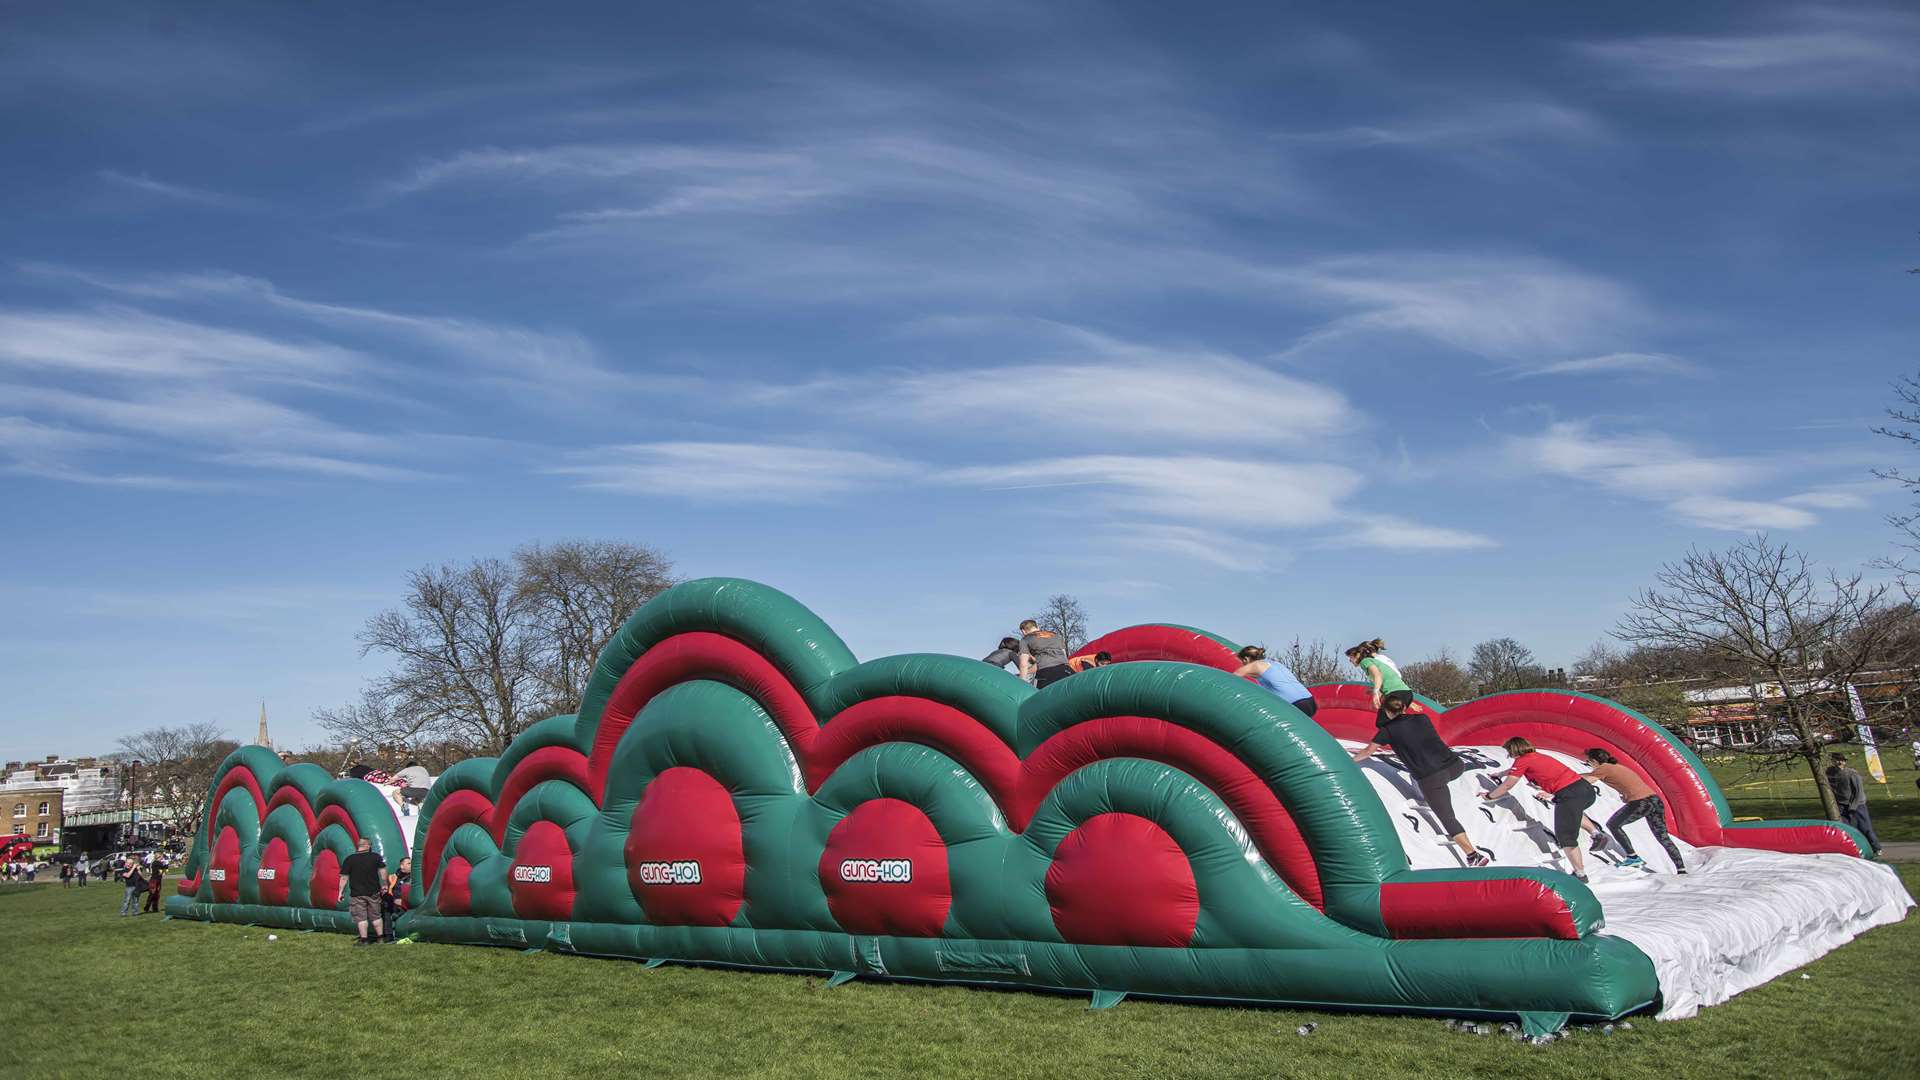 The Gung-Ho! inflatable contains enough air to fill 12 million footballs